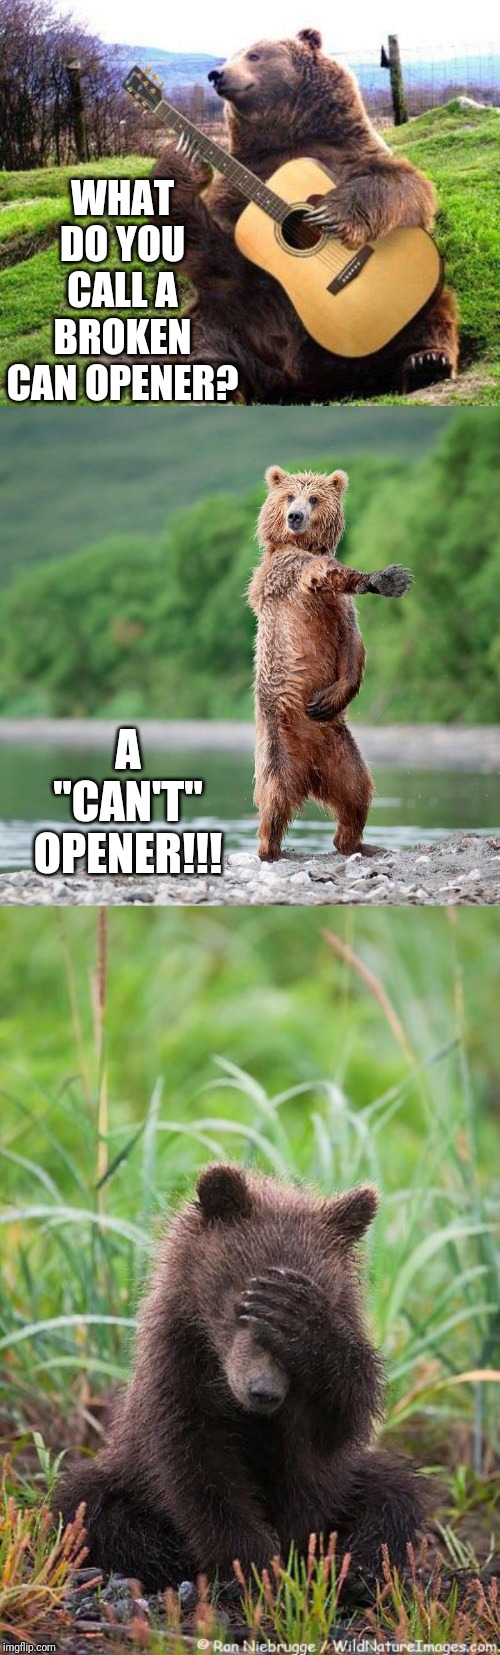 WHAT DO YOU CALL A BROKEN CAN OPENER? A "CAN'T" OPENER!!! | image tagged in bear with guitar,dancing bear,facepalm bear | made w/ Imgflip meme maker